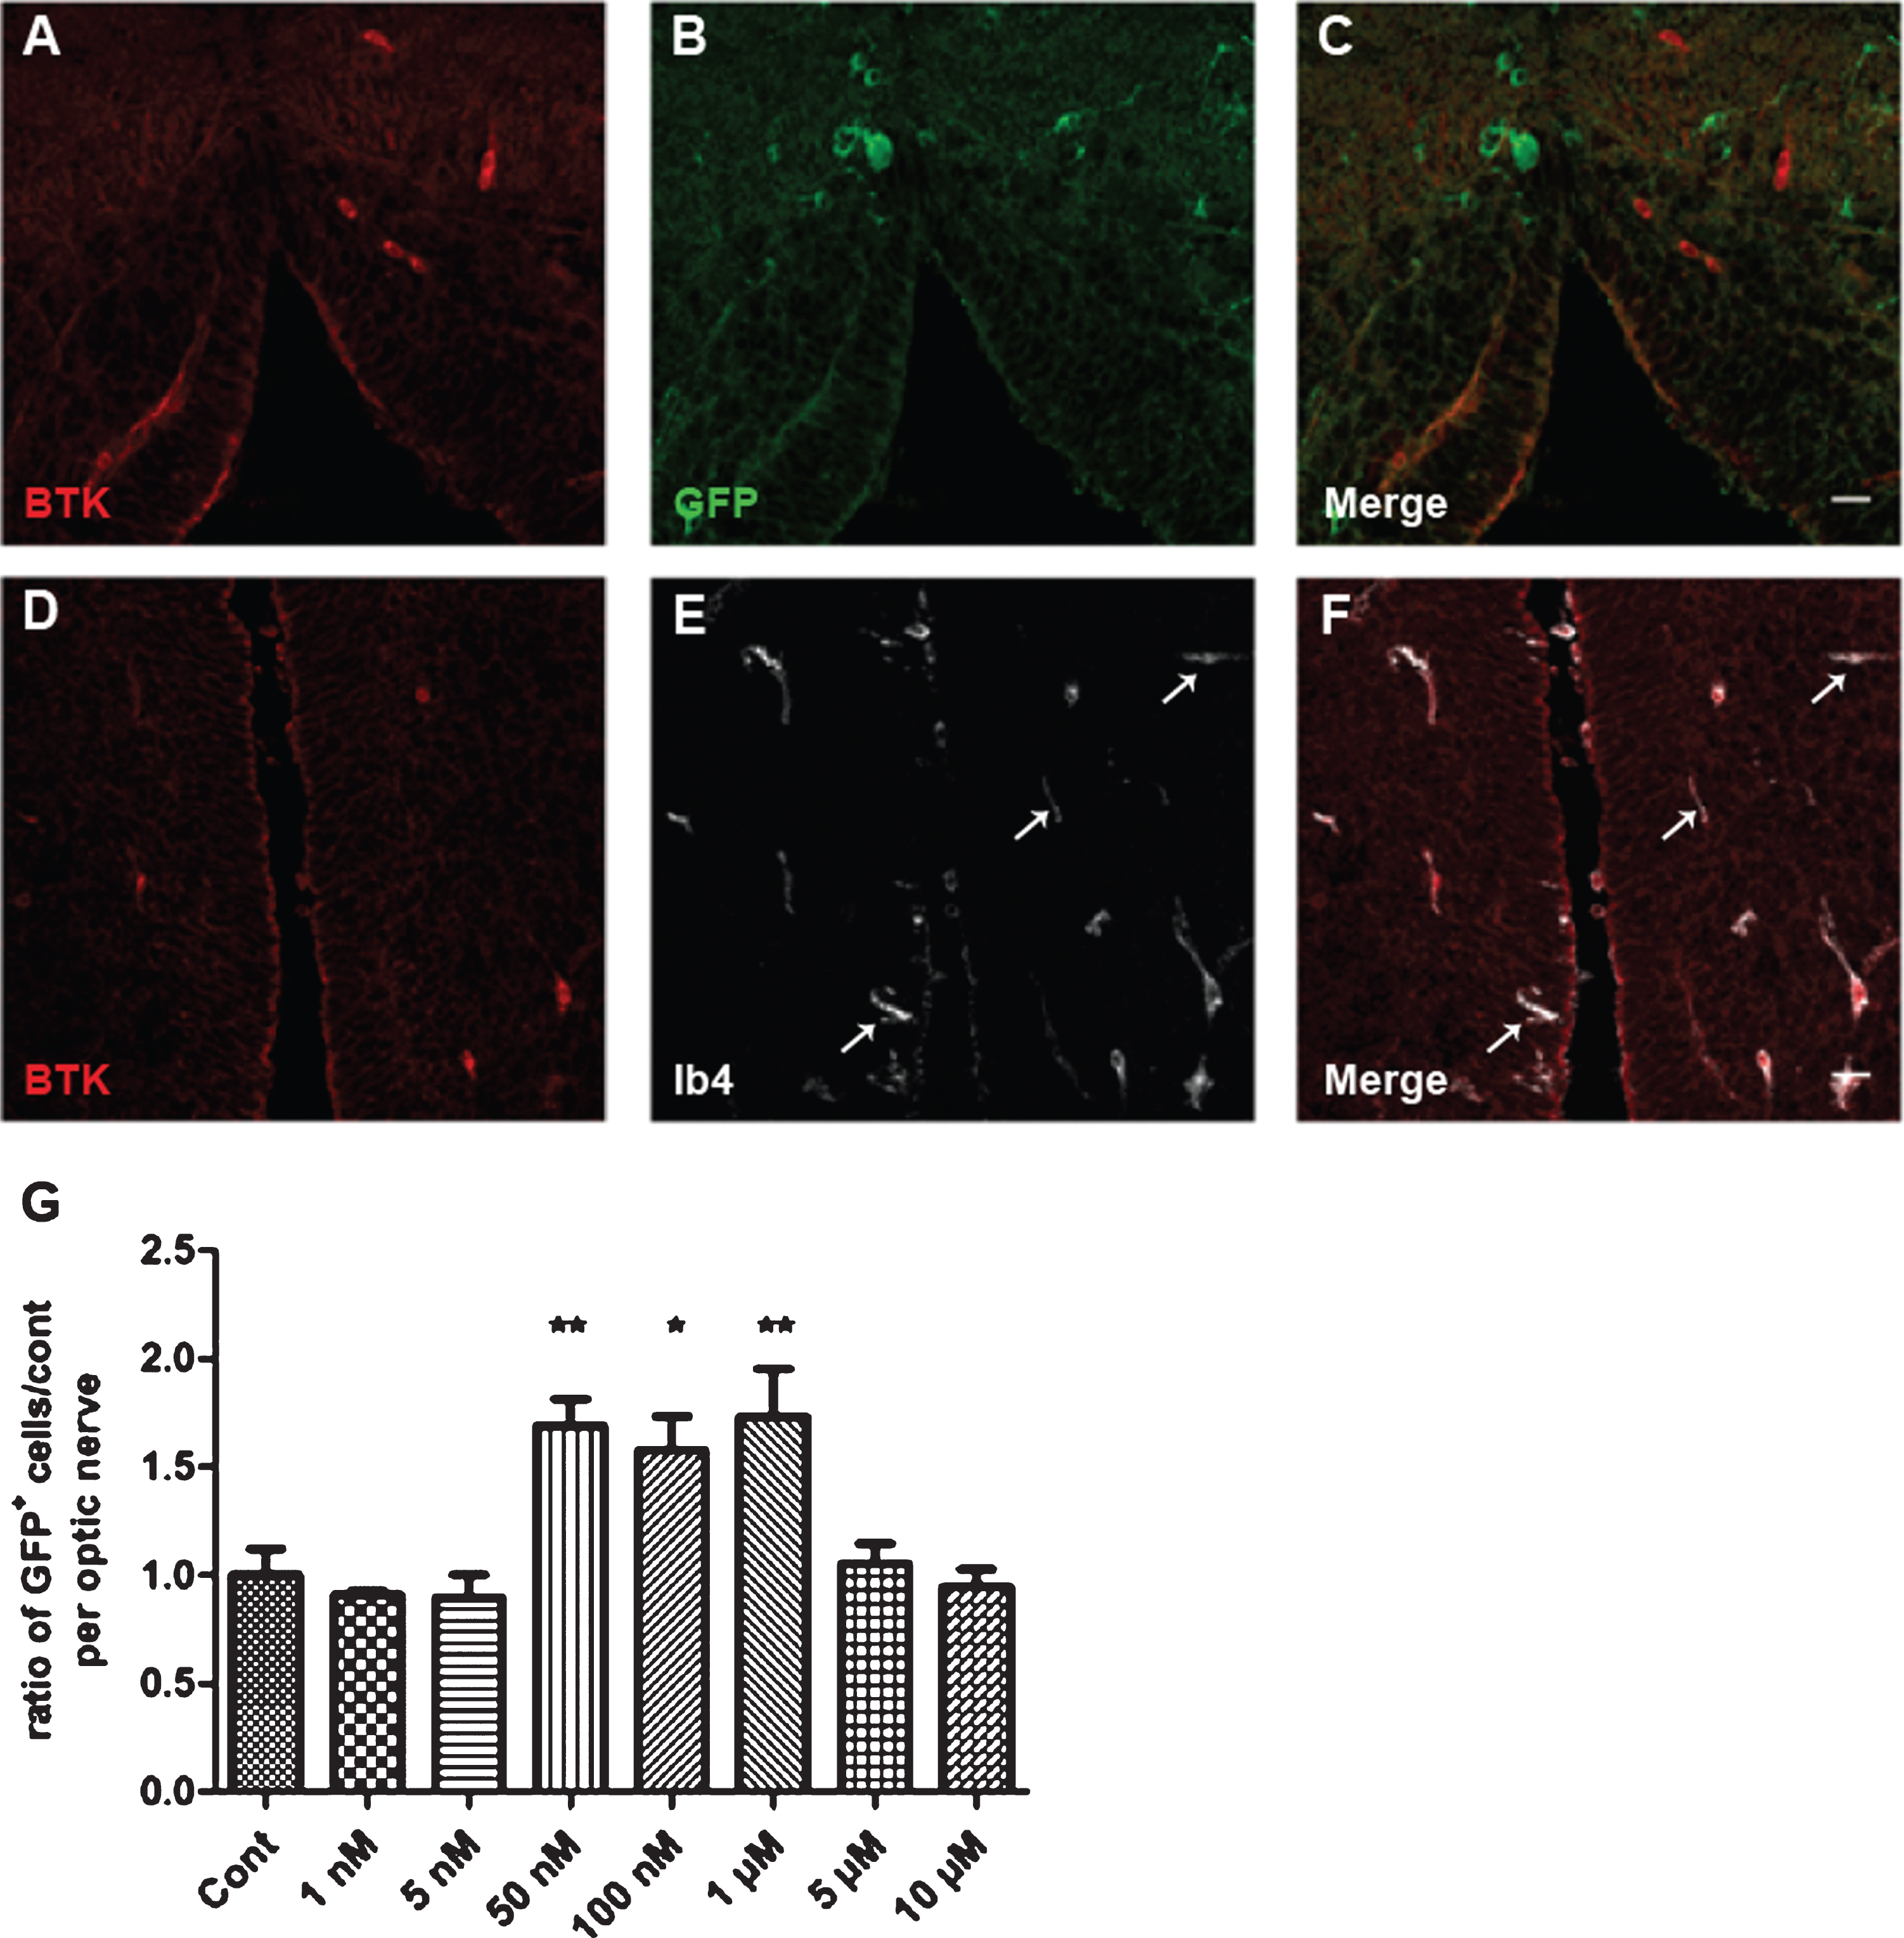 Cellular expression of BTK in Xenopus and dose–response of remyelination by BTKi (BTKi-1). A–F: Immunodetection of BTK in microglial cells, but not in oligodendrocytes. Coronal (A–C) or horizontal (D–F) tissue sections across the brain stem of stage 52–53 MBP-GFP-NTR tadpoles double-labeled with anti-BTK (A, C, D, F, red) and anti-GFP (B, C, oligodendrocytes, green) antibodies or isolectin IB4 (E, F, microglia, white). Note in A–C the complete exclusion of the two labels, illustrating absence of BTK in oligodendrocytes. (D–F) In contrast, all BTK+ cells were also IB4+. However, some IB4+ cells (white arrows) were not BTK+. G: Demyelination of stage 52–53 MBP-GFP-NTR tadpoles was achieved by 10 days exposure to metronidazole (10 mM) in the swimming water. Tadpoles were then returned to normal water or water containing increasing concentration of BTKi (BTKi-1) for 3 days. Remyelination was assayed by counting the number of GFP+ cells per optic nerve on day 3 of the repair period. Treatment of tadpoles with BTKi (BTKi-1) at concentrations ranging between 50 nM and 1 μM improved remyelination up to 1.7-foldcompared to spontaneous recovery (control) set as 1. (*p < 0.01; **p < 0.001). Scale bar in A–F = 20 μm.